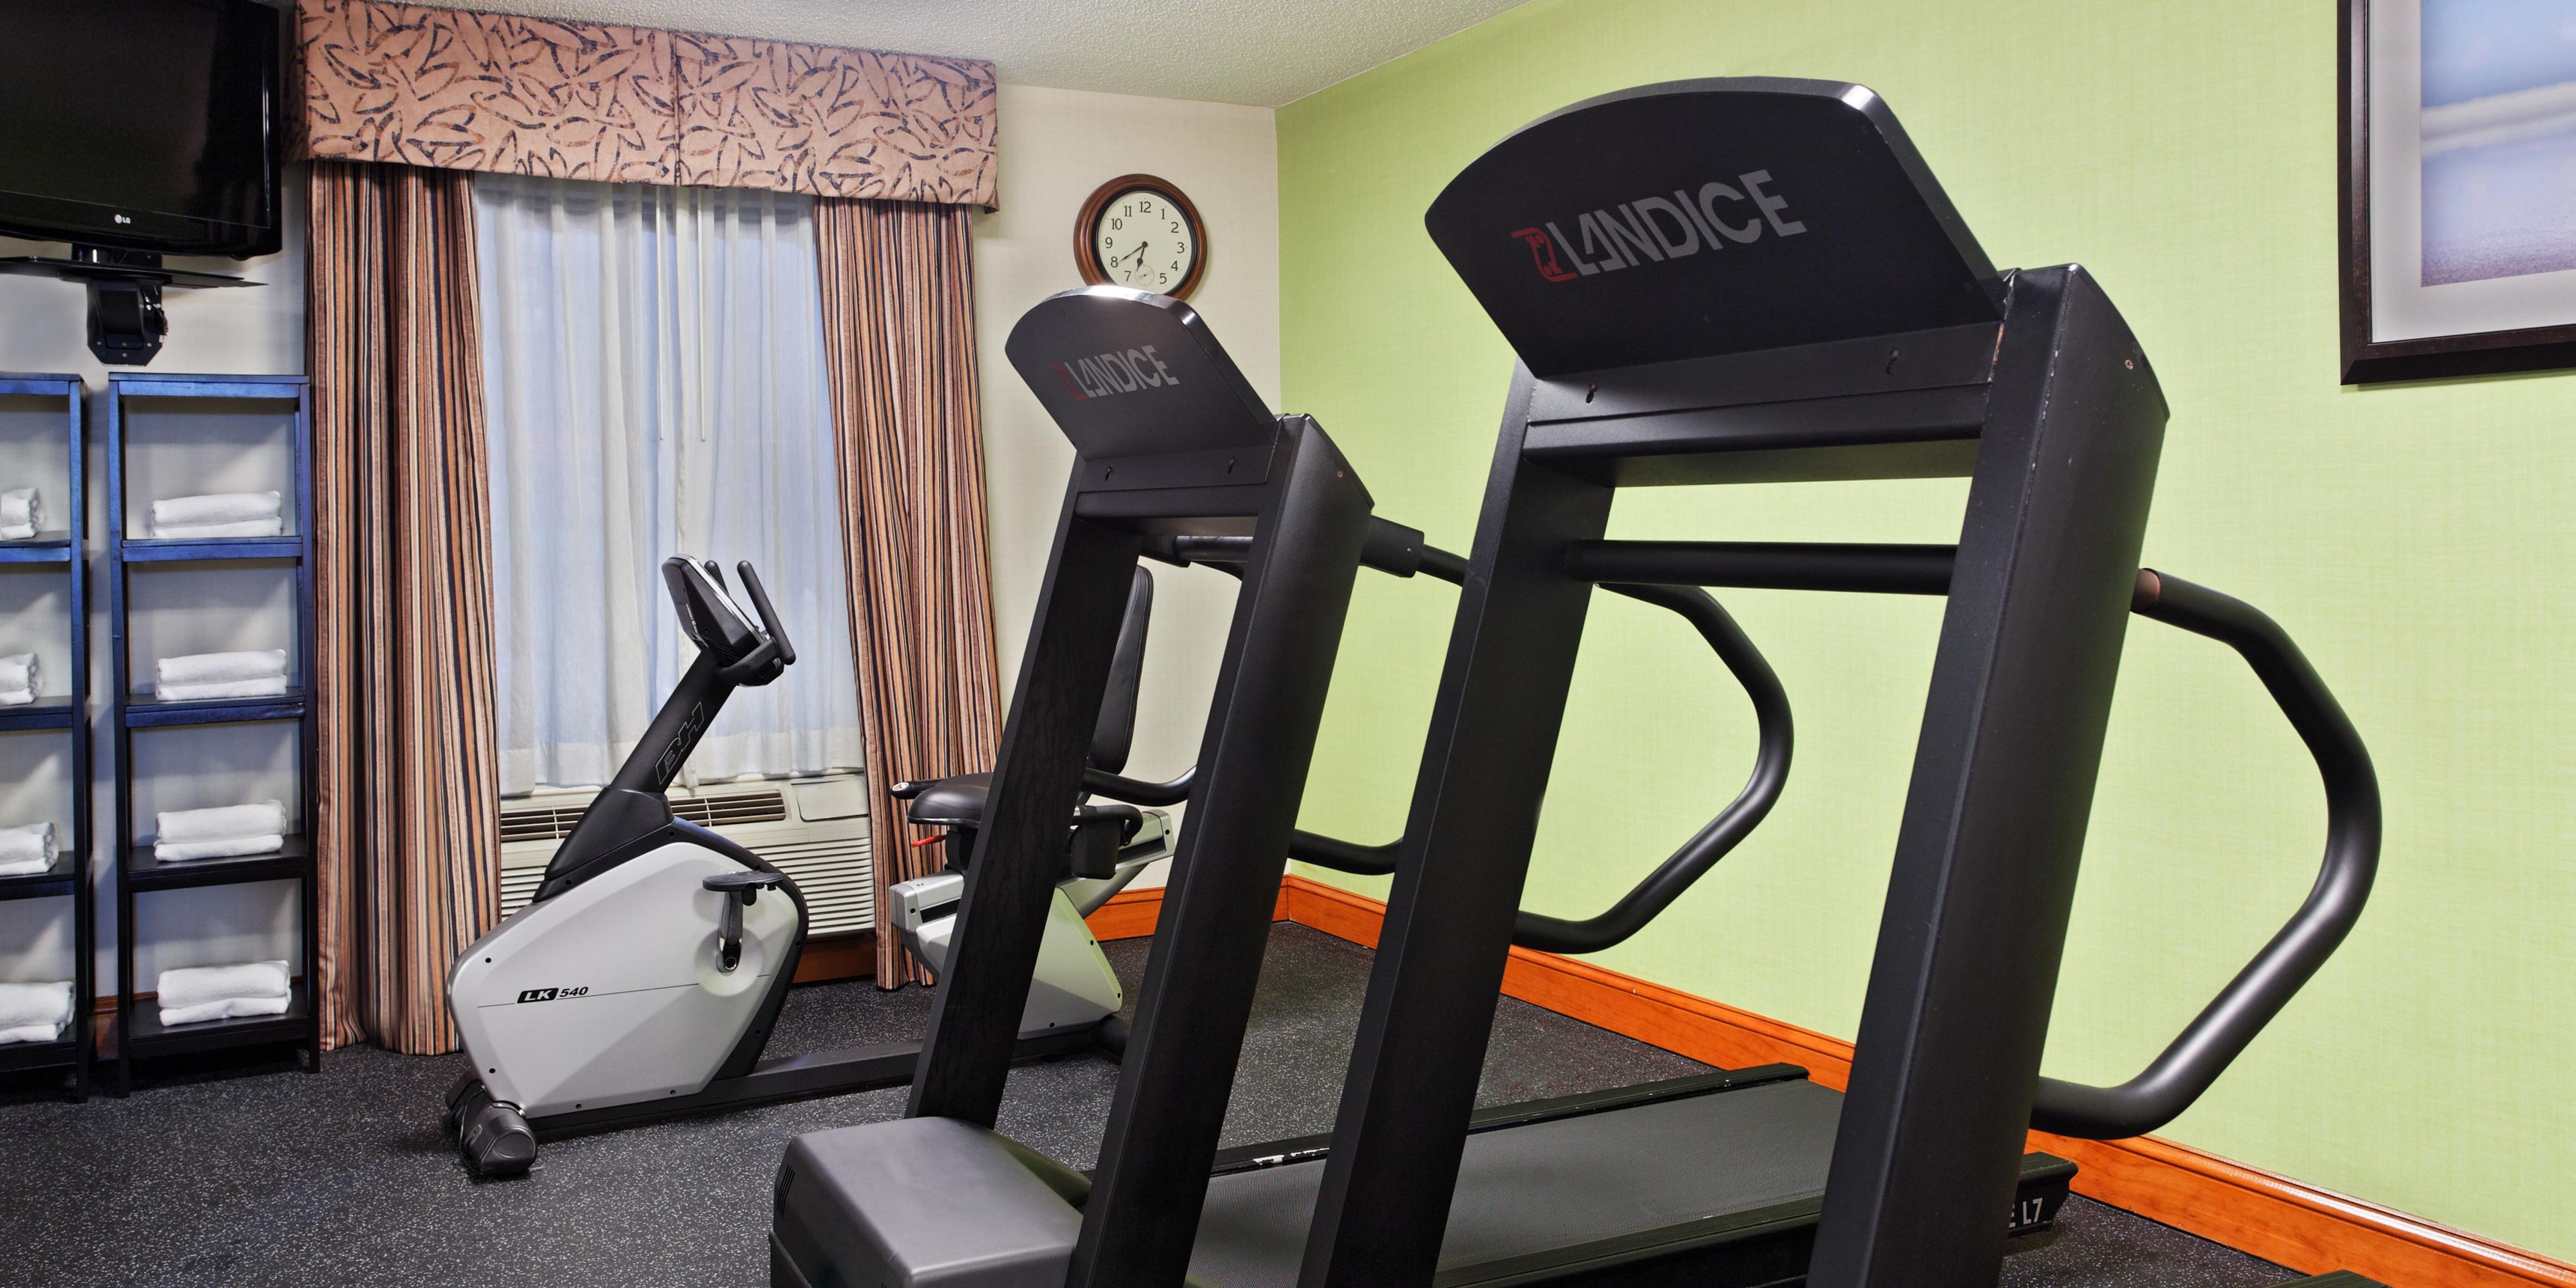 Enjoy working out in our Fitness Center. There are also several walking trails in the area.